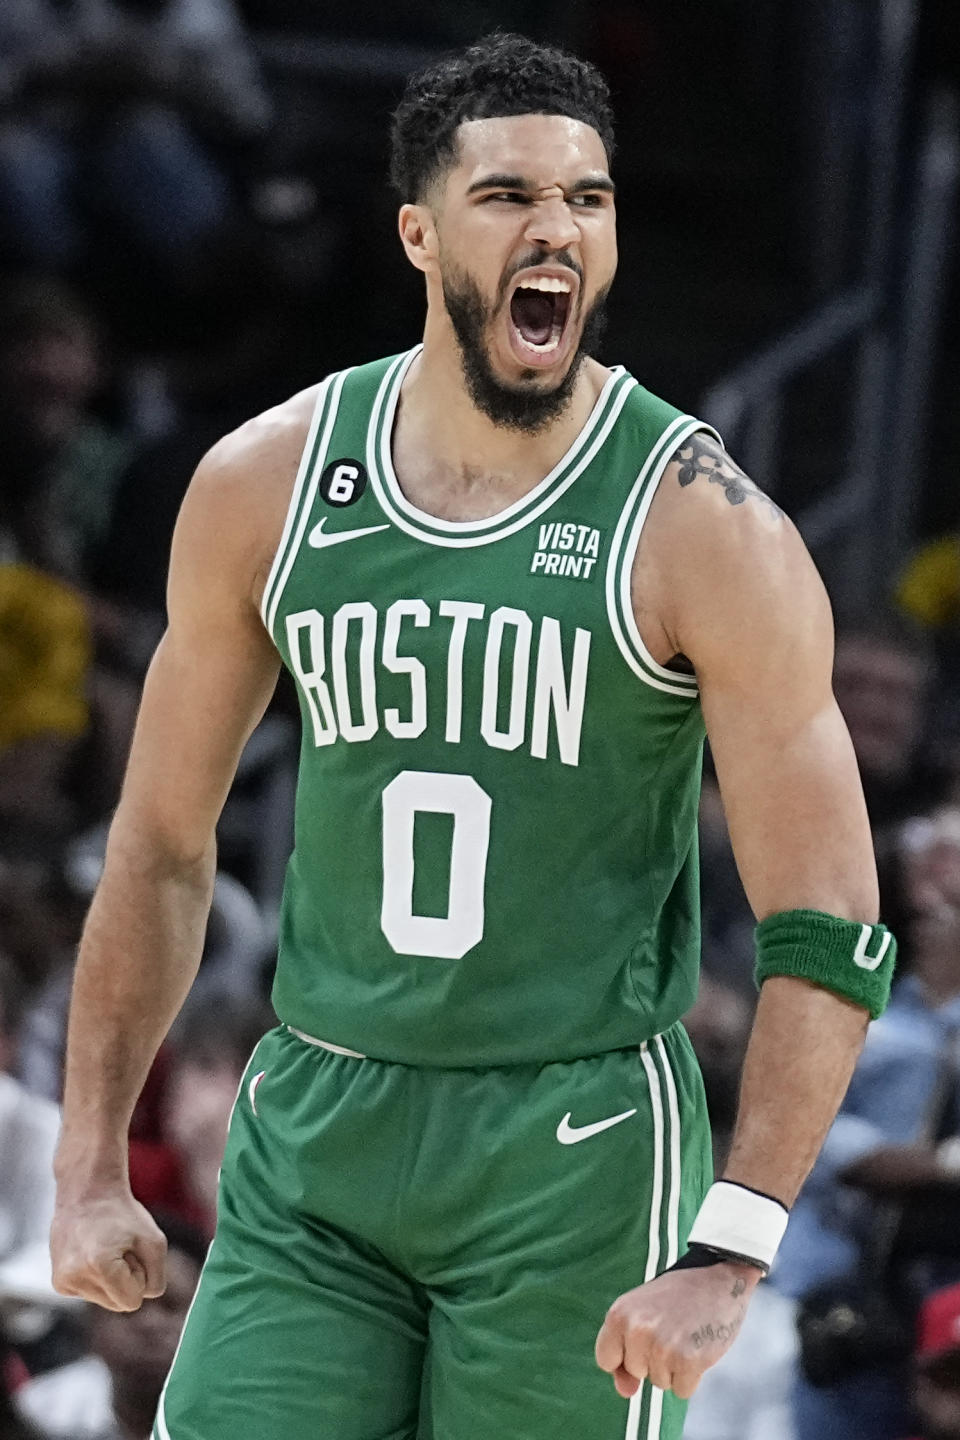 Boston Celtics forward Jayson Tatum (0) celebrates after scoring against the Atlanta Hawks during the second half of Game 4 of a first-round NBA basketball playoff series, Sunday, April 23, 2023, in Atlanta. (AP Photo/Brynn Anderson)